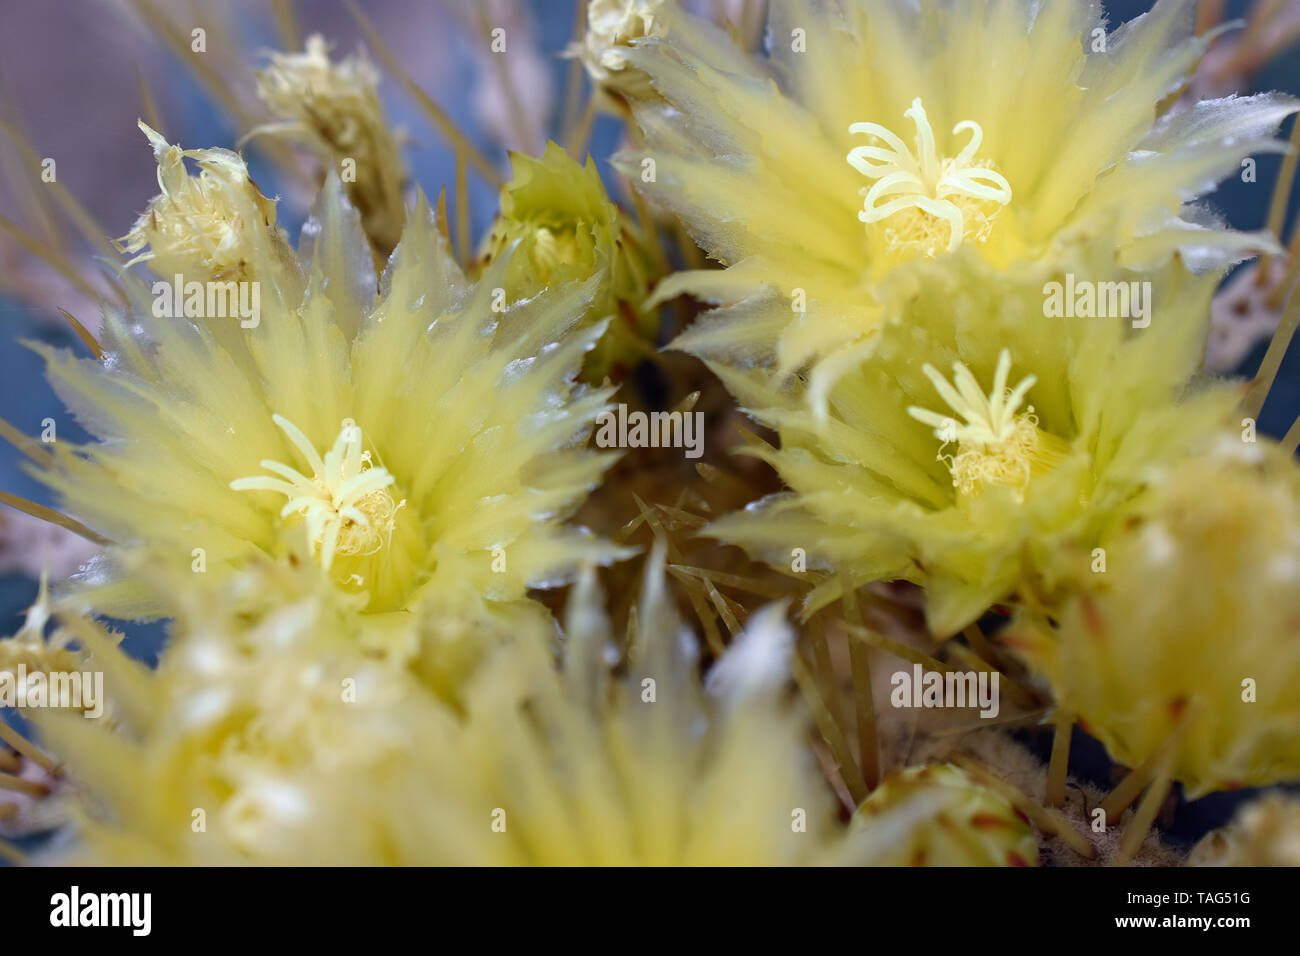 Blue Barrel Cactus from Central Mexico Stock Photo